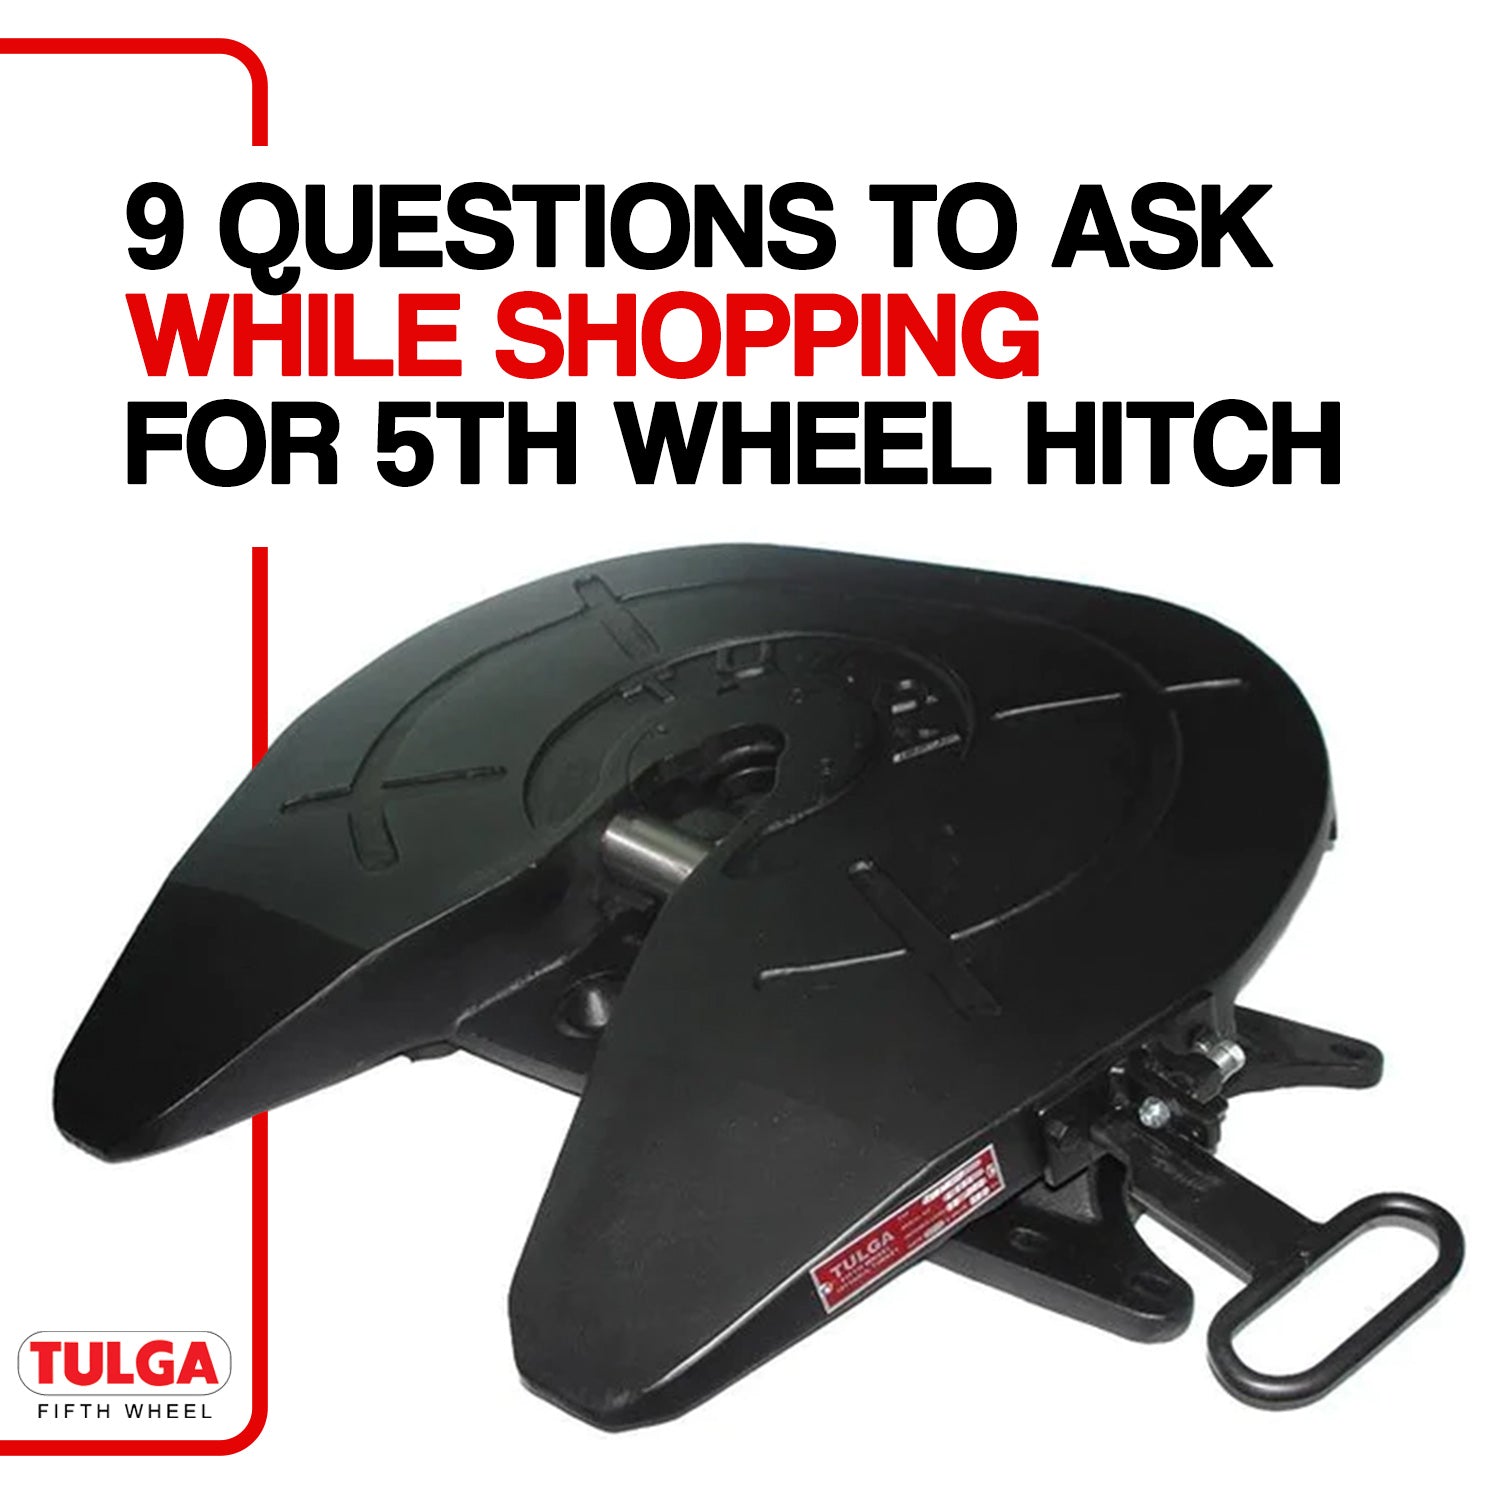 9 Questions to Ask While Shopping for 5th Wheel Hitch